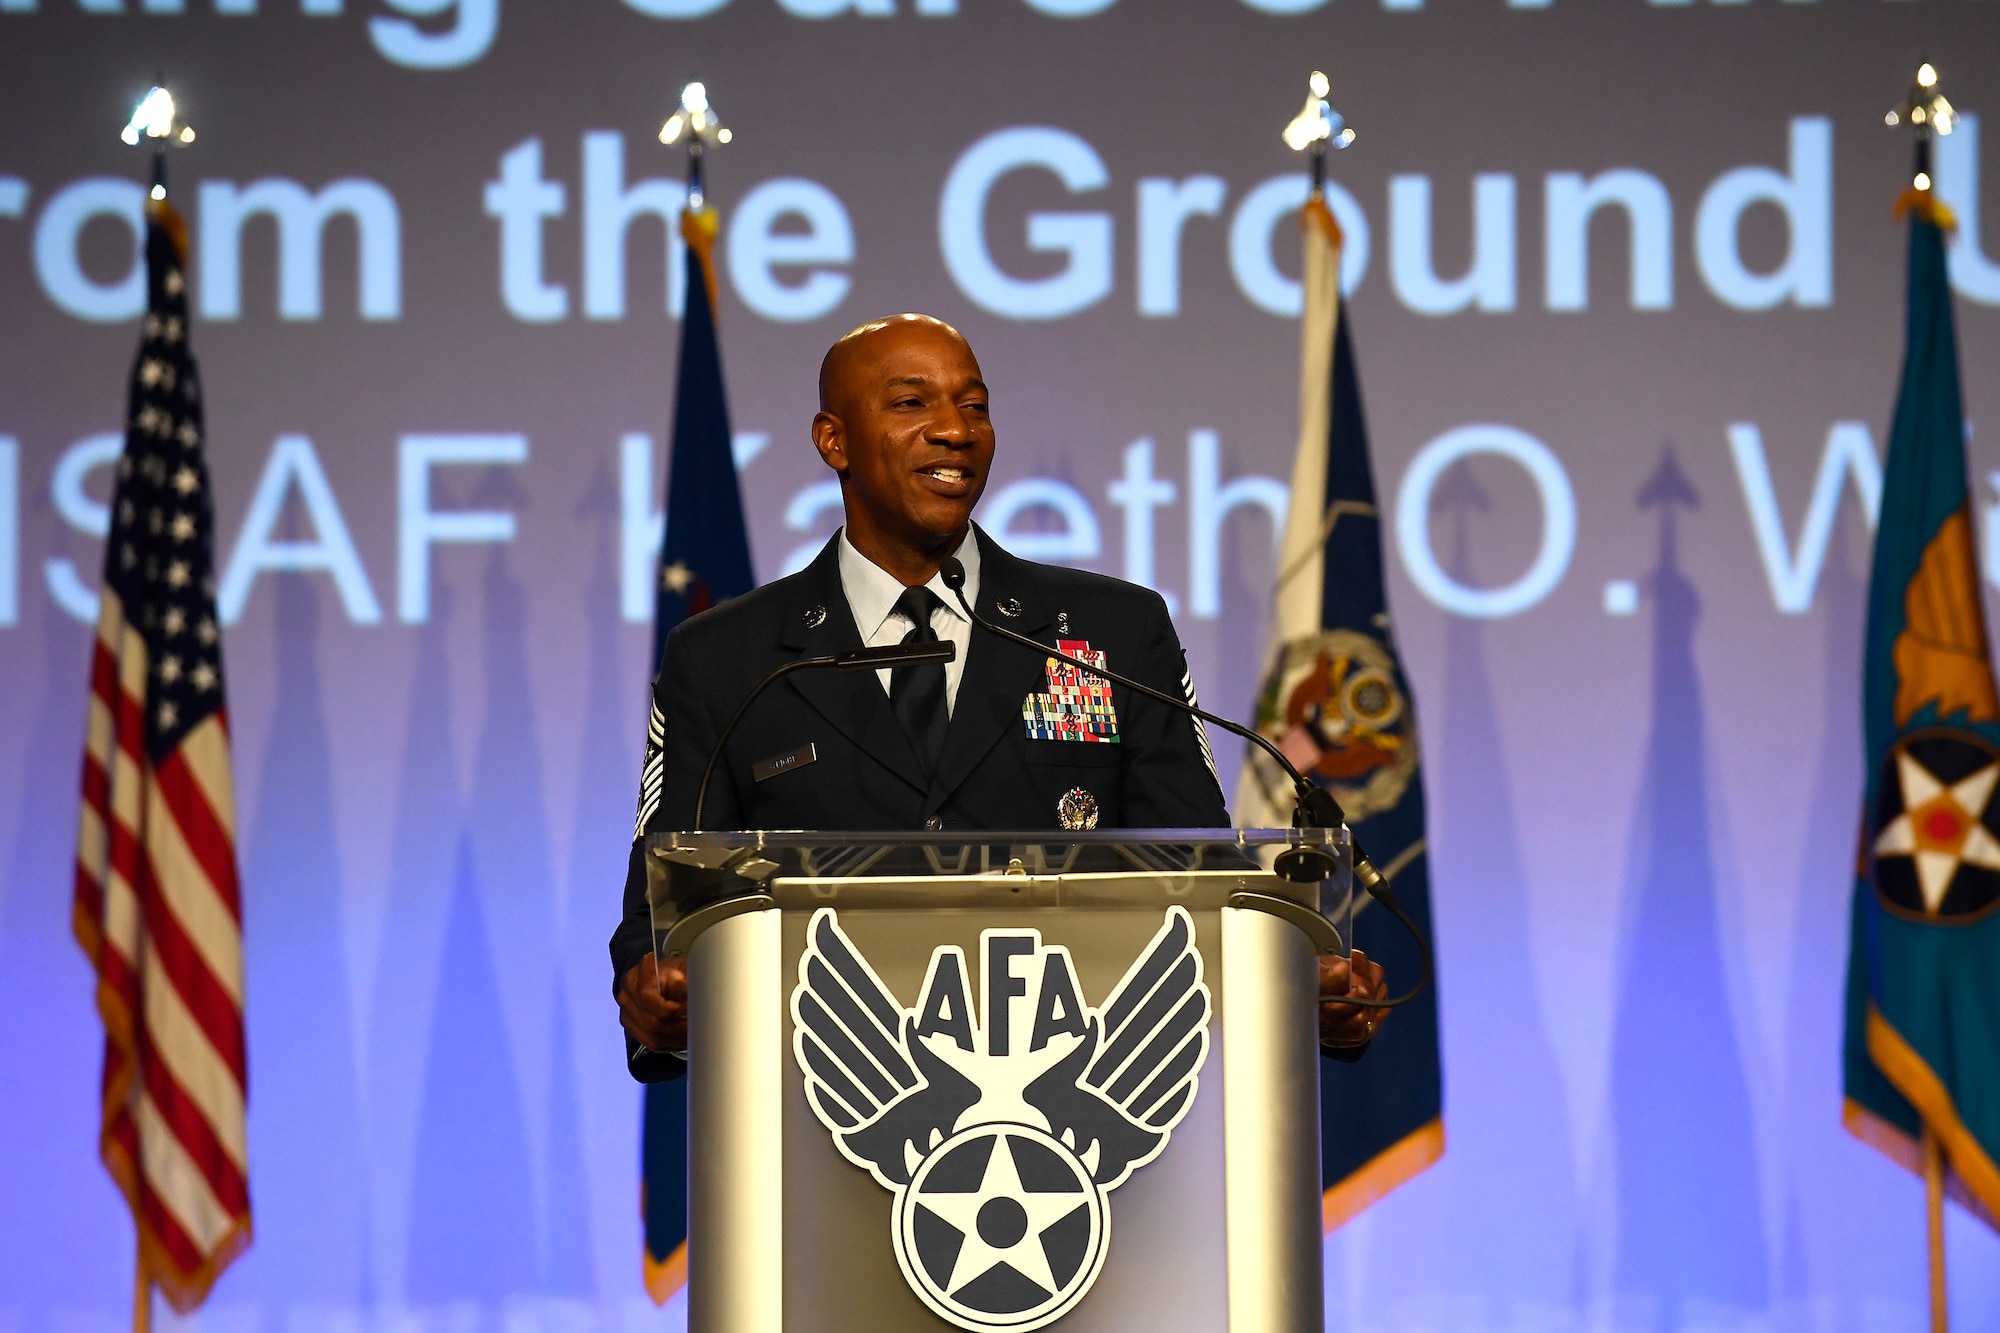 Chief Master Sgt. of the Air Force Kaleth O. Wright gives his speech on resiliency during the Air Force Association Air, Space and Cyber Conference in National Harbor, Md., Sept. 19, 2018. During his remarks, Wright spoke about the importance of Airmen taking care of themselves and each other. (U.S. Air Force photo by Staff Sgt. Rusty Frank)